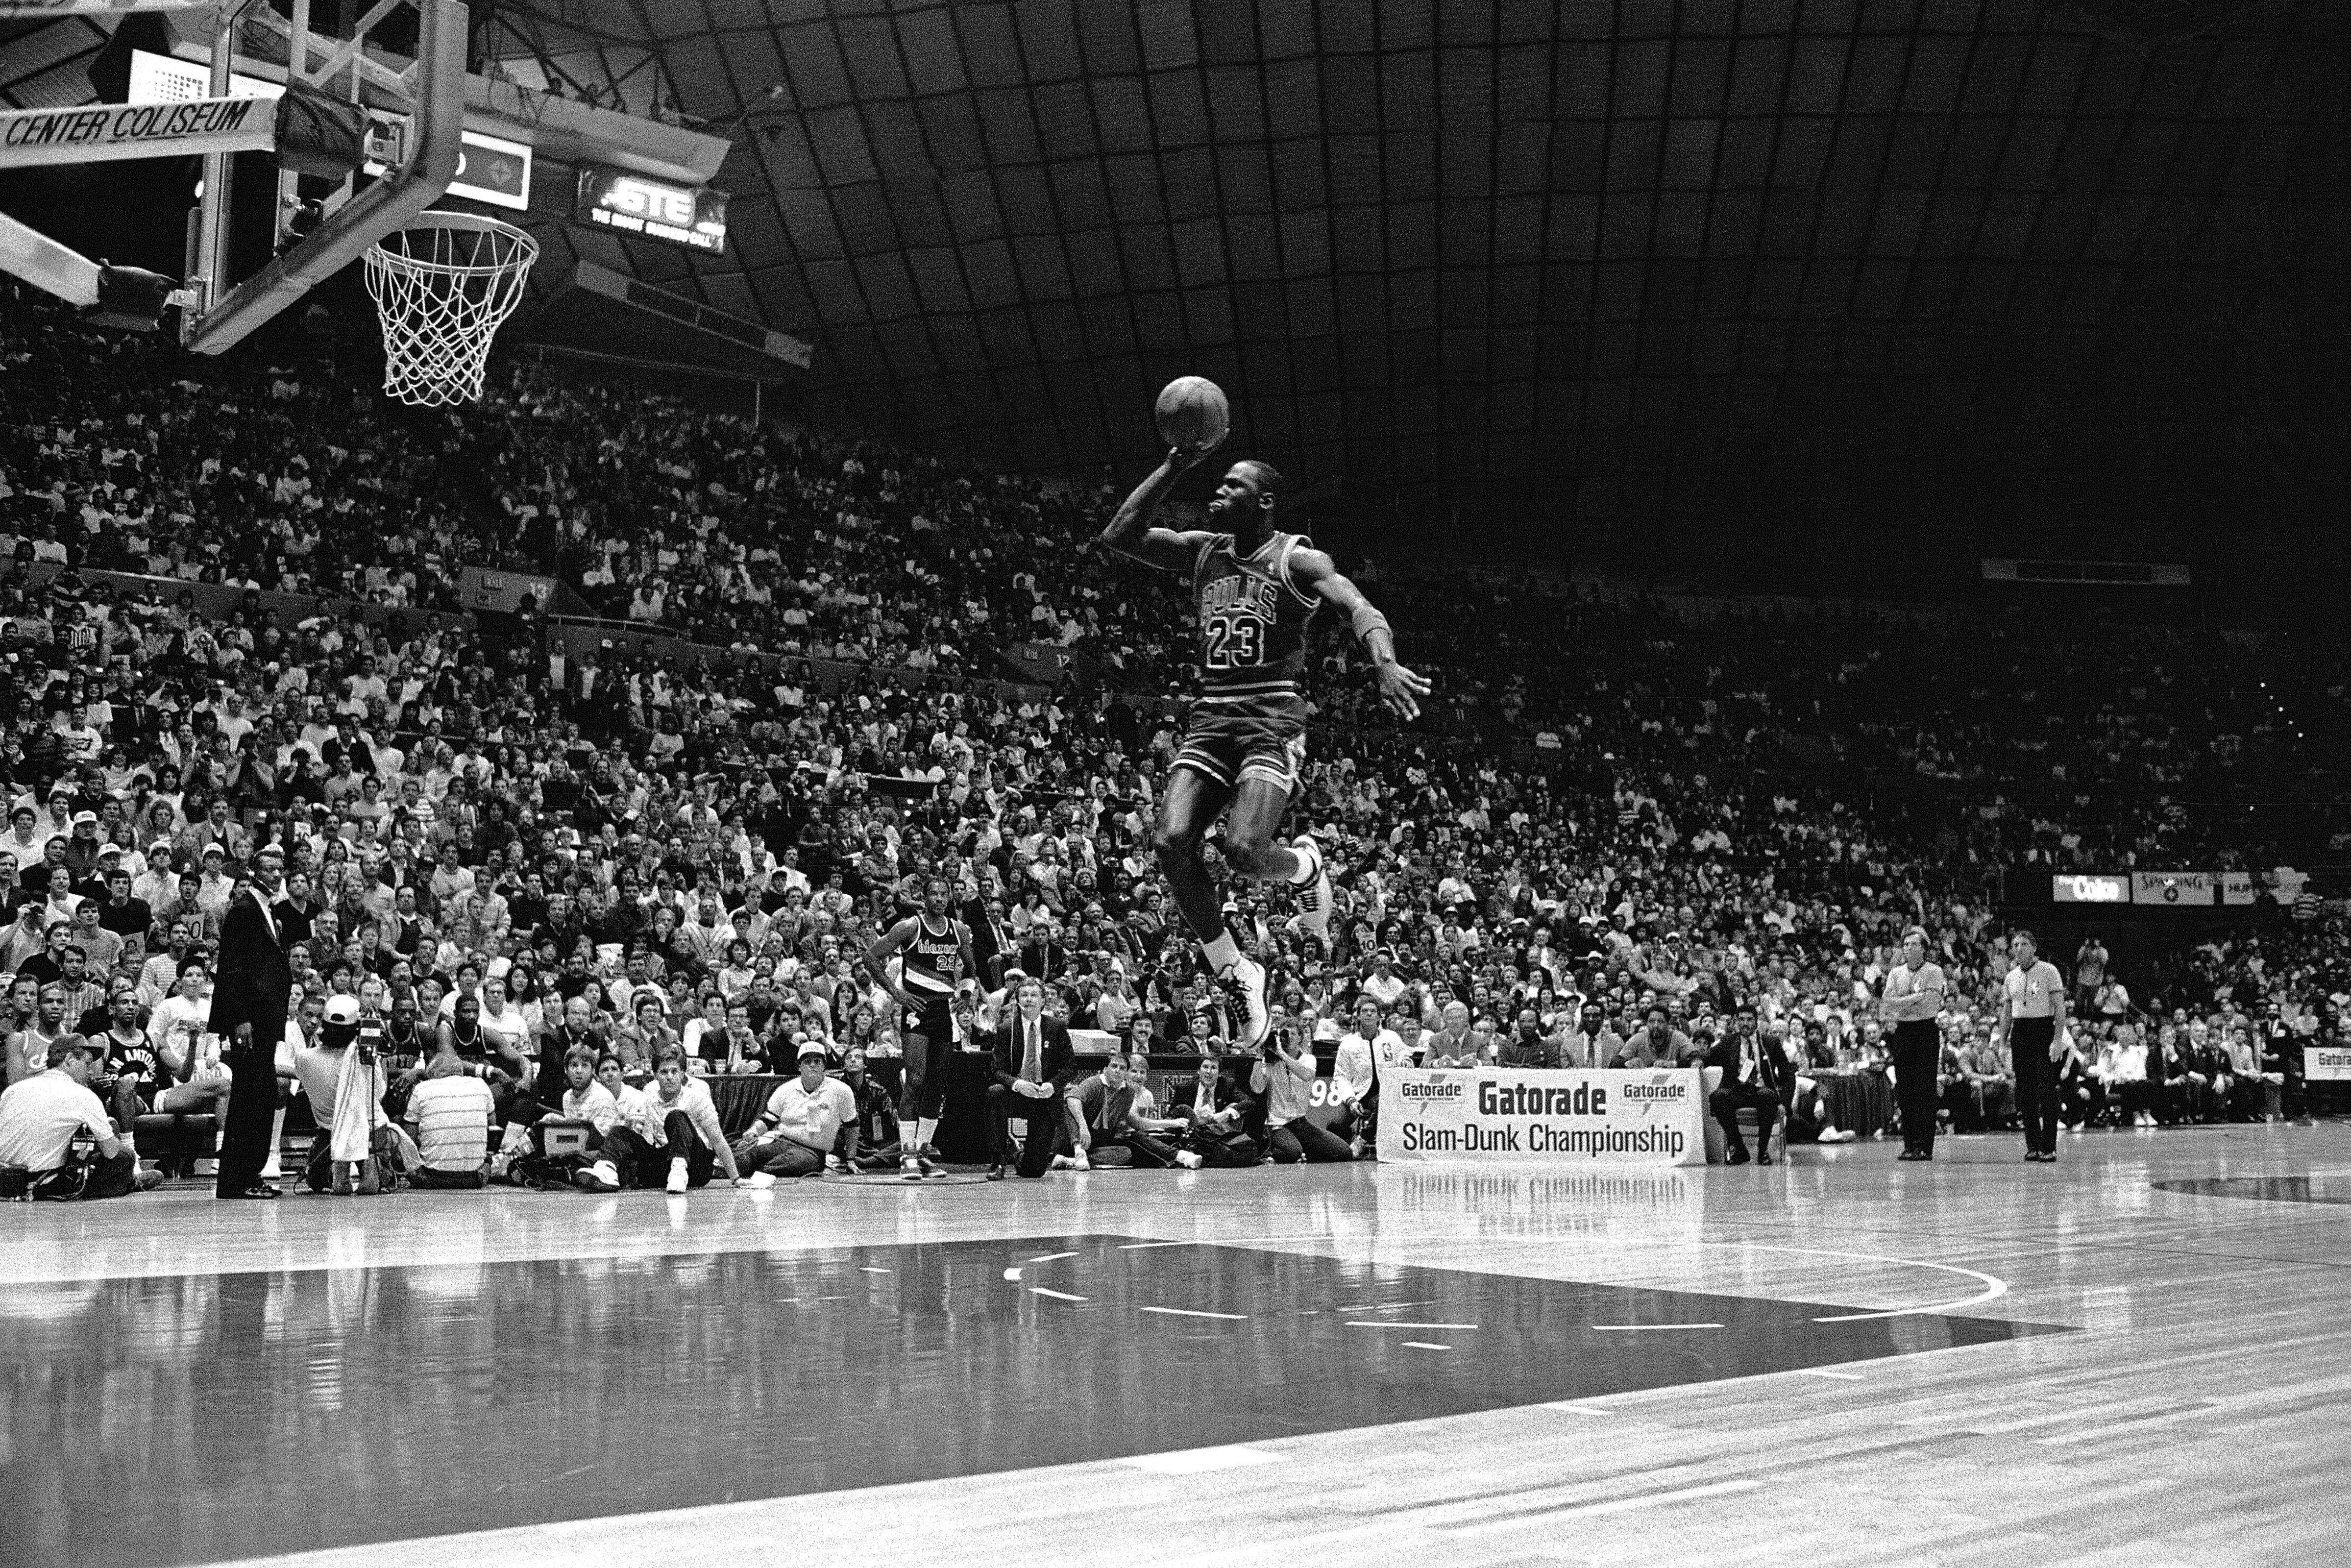 Photo of a basketball player jumping towards hoop